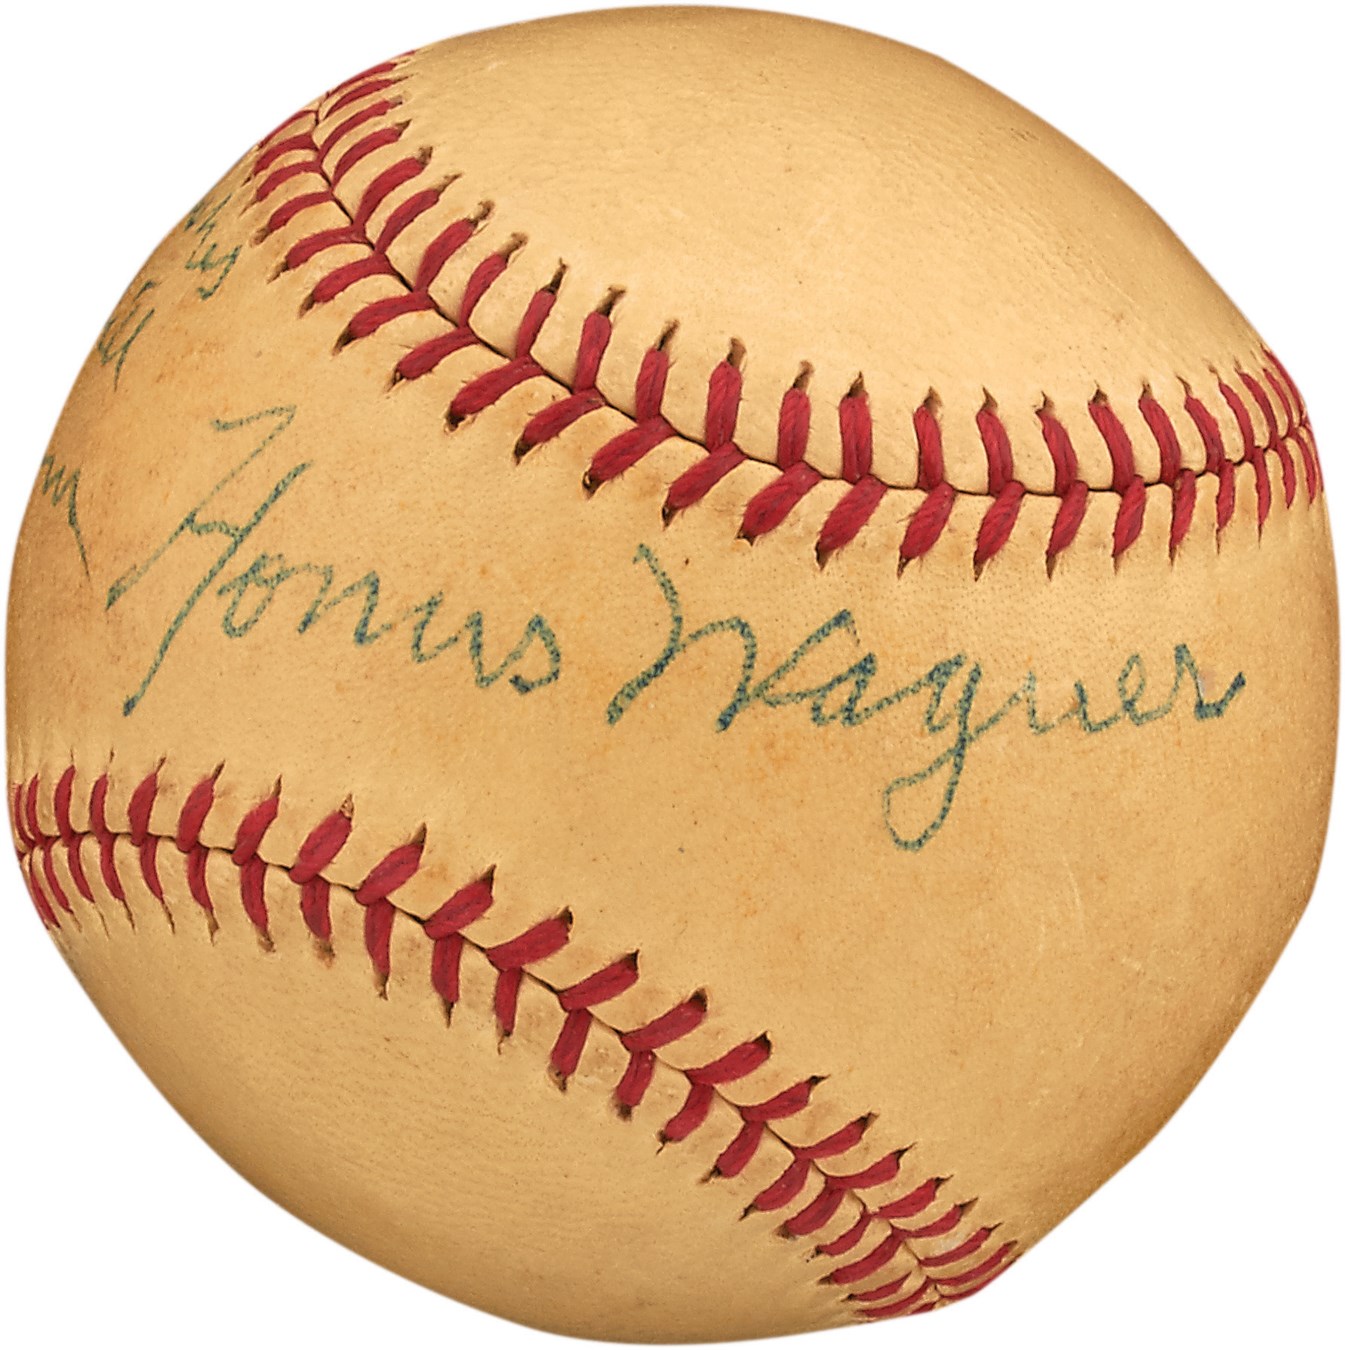 Baseball Autographs - Exceptional Honus Wagner Single-Signed Baseball with PSA/DNA Graded "7" Signature